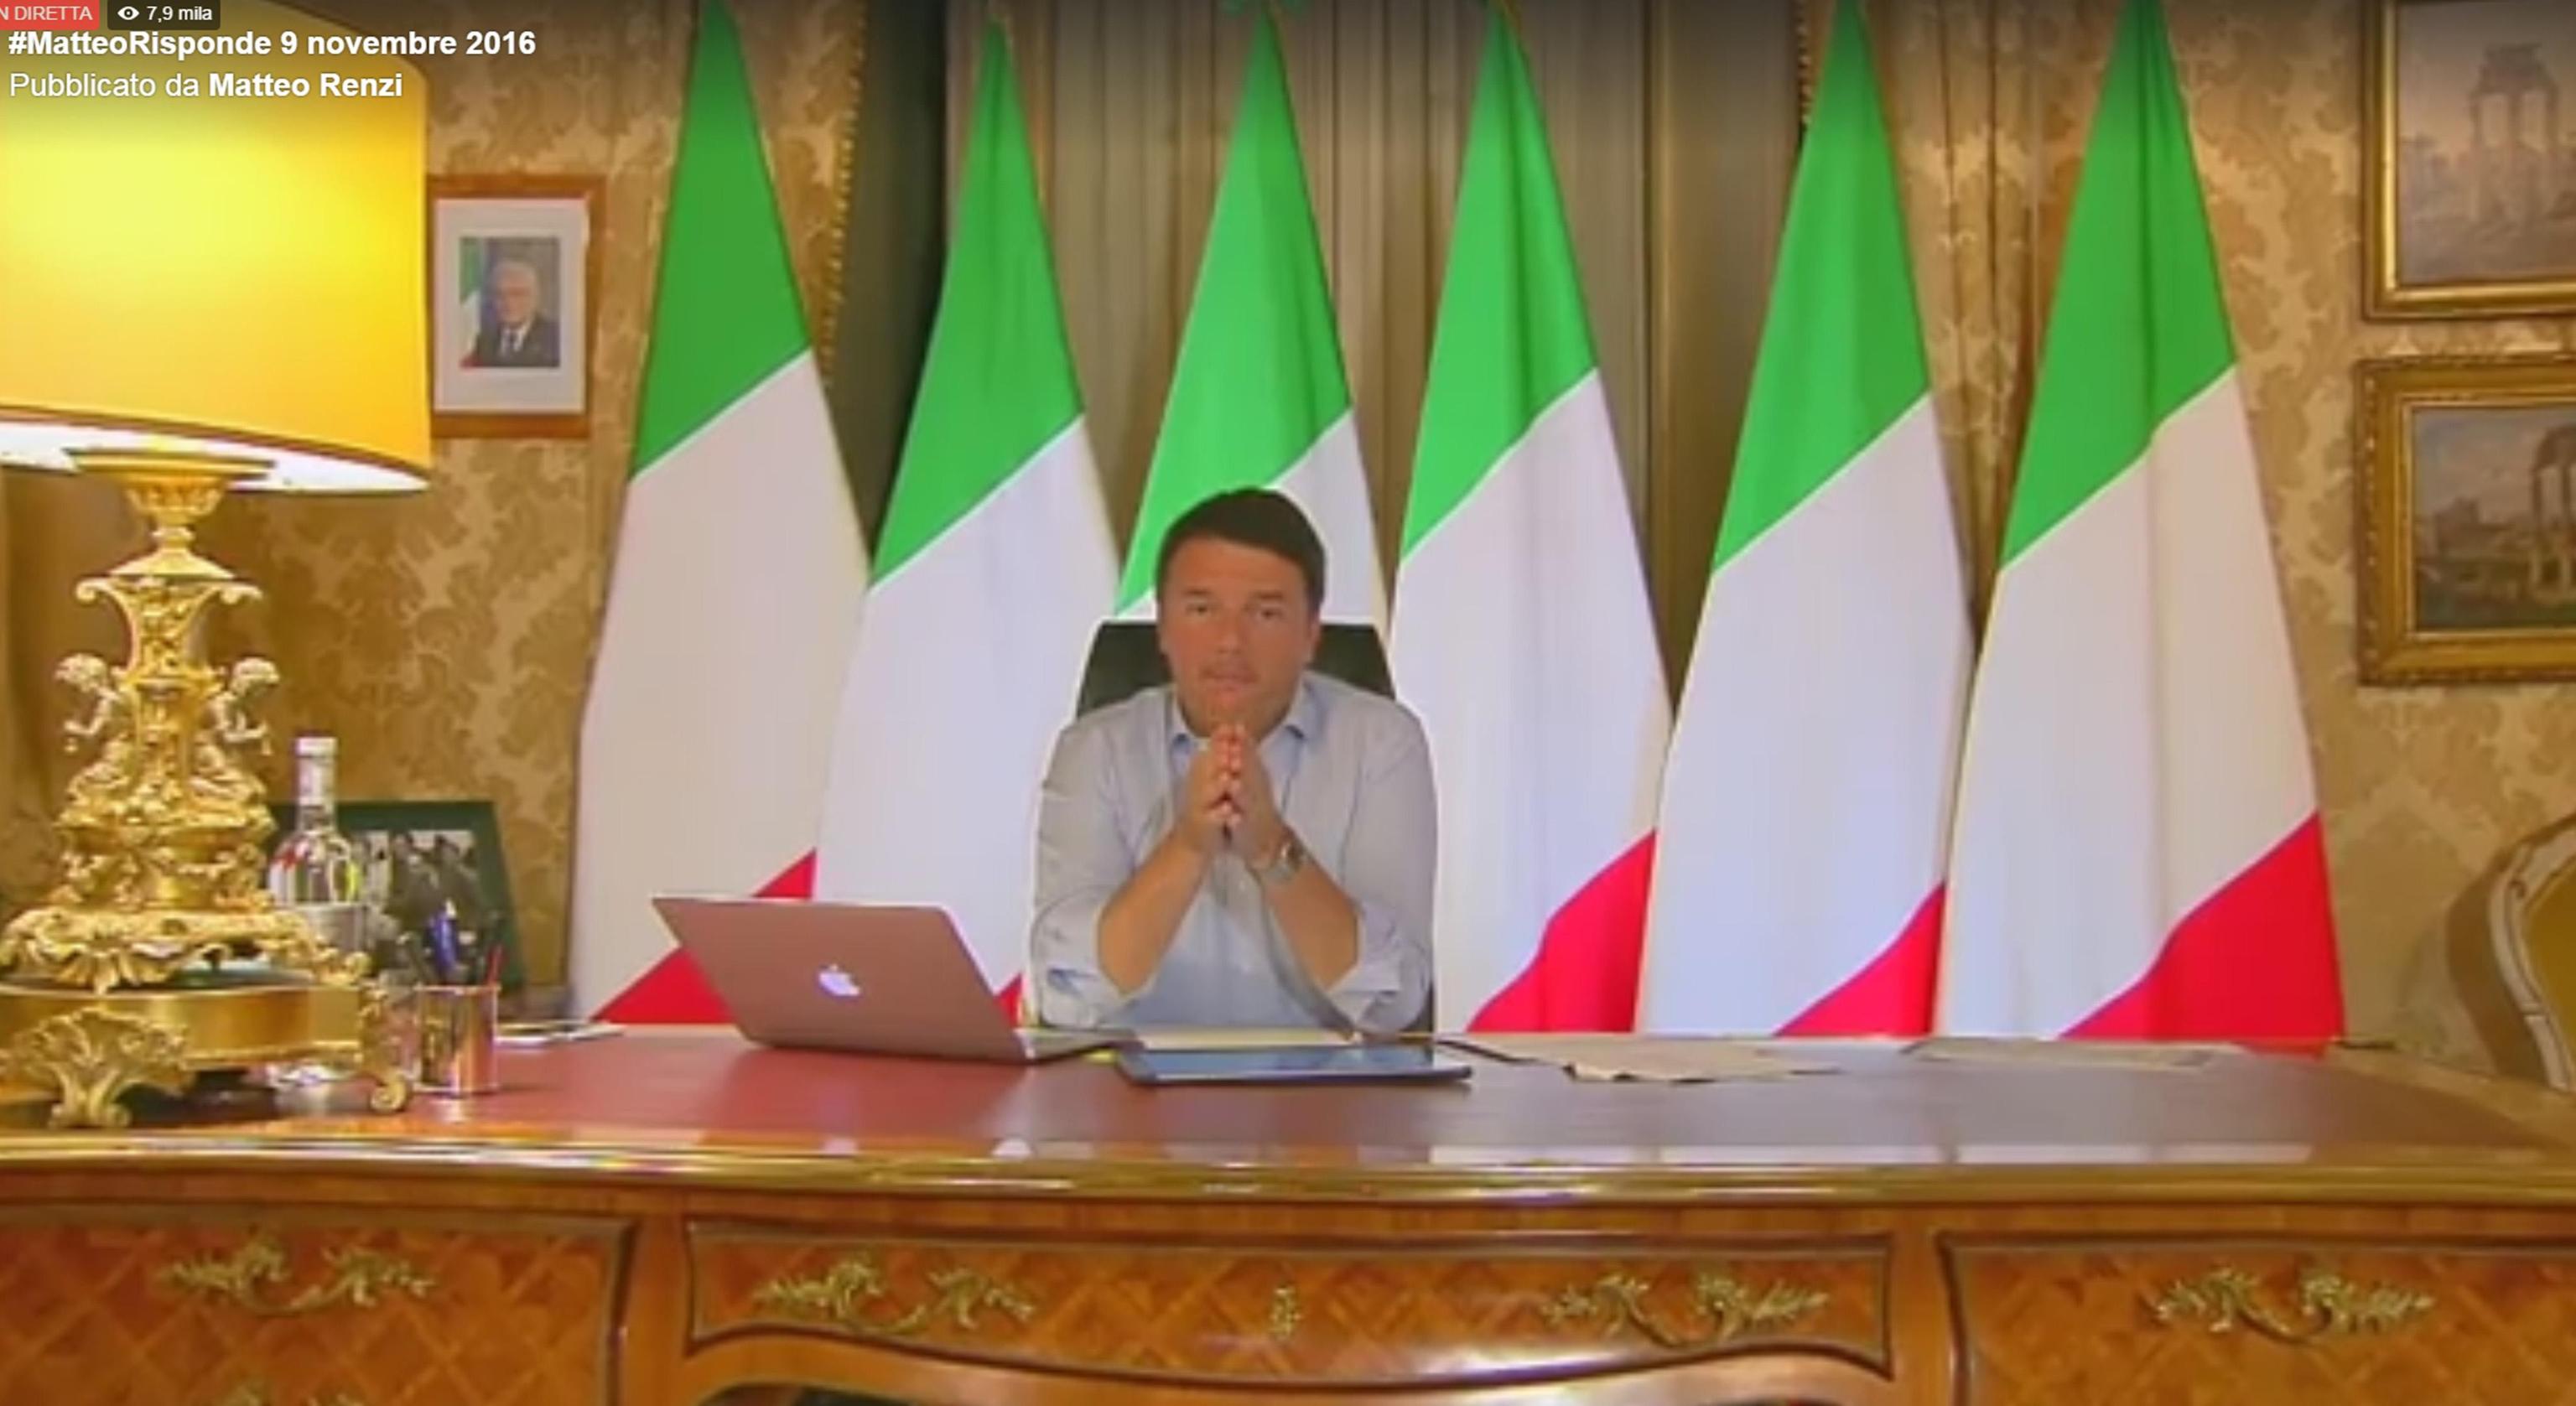 Un fermo immagine mostra il presidente del Consiglio, Matteo Renzi, durante la diretta Facebook #Matteorisponde, 9 novembre 2016. ANSA/ FACEBOOK MATTEO RENZI +++ ANSA PROVIDES ACCESS TO THIS HANDOUT PHOTO TO BE USED SOLELY TO ILLUSTRATE NEWS REPORTING OR COMMENTARY ON THE FACTS OR EVENTS DEPICTED IN THIS IMAGE; NO ARCHIVING; NO LICENSING +++